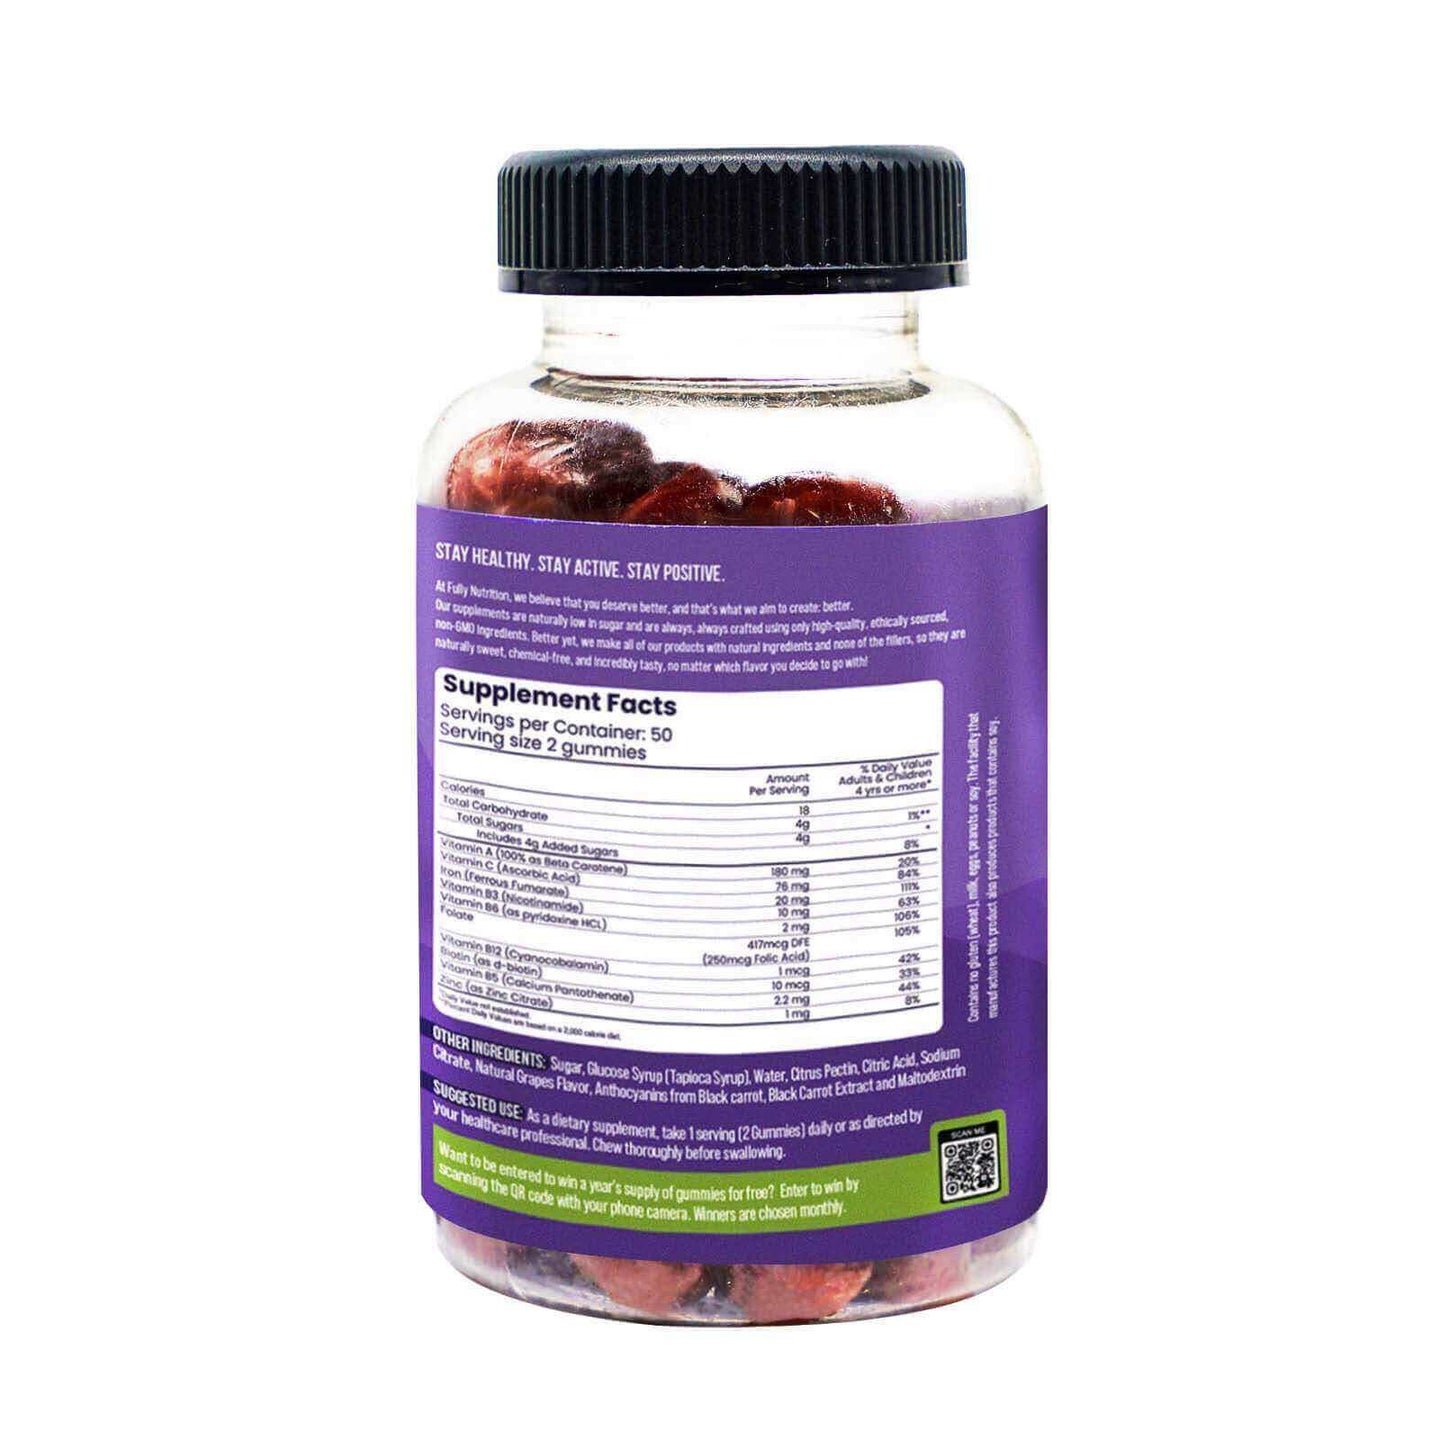 Image of back side of packaging for Iron gummies, showing nutritional information and ingredients list.